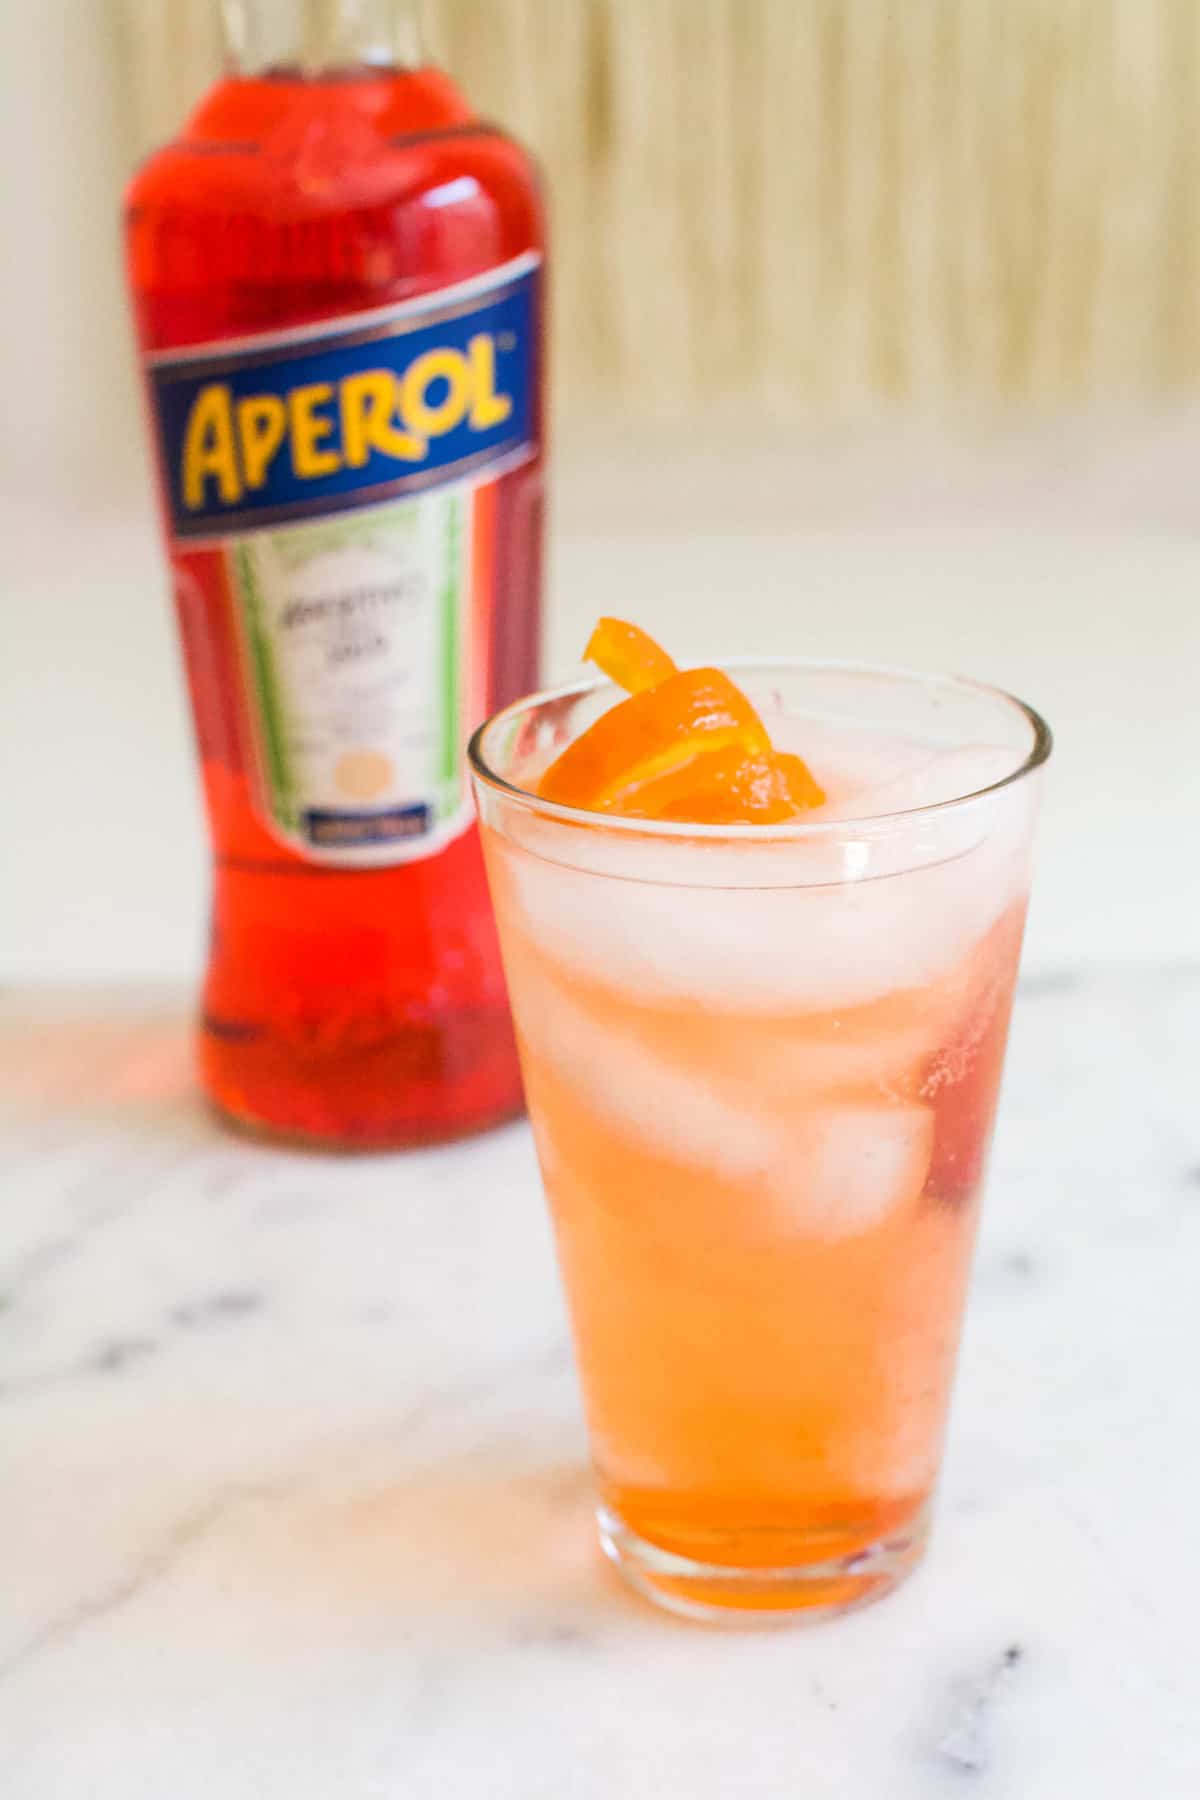 An Aperol Gin and Tonic over ice in a tall glass on a table with a garnish next to a bottle of Aperol.